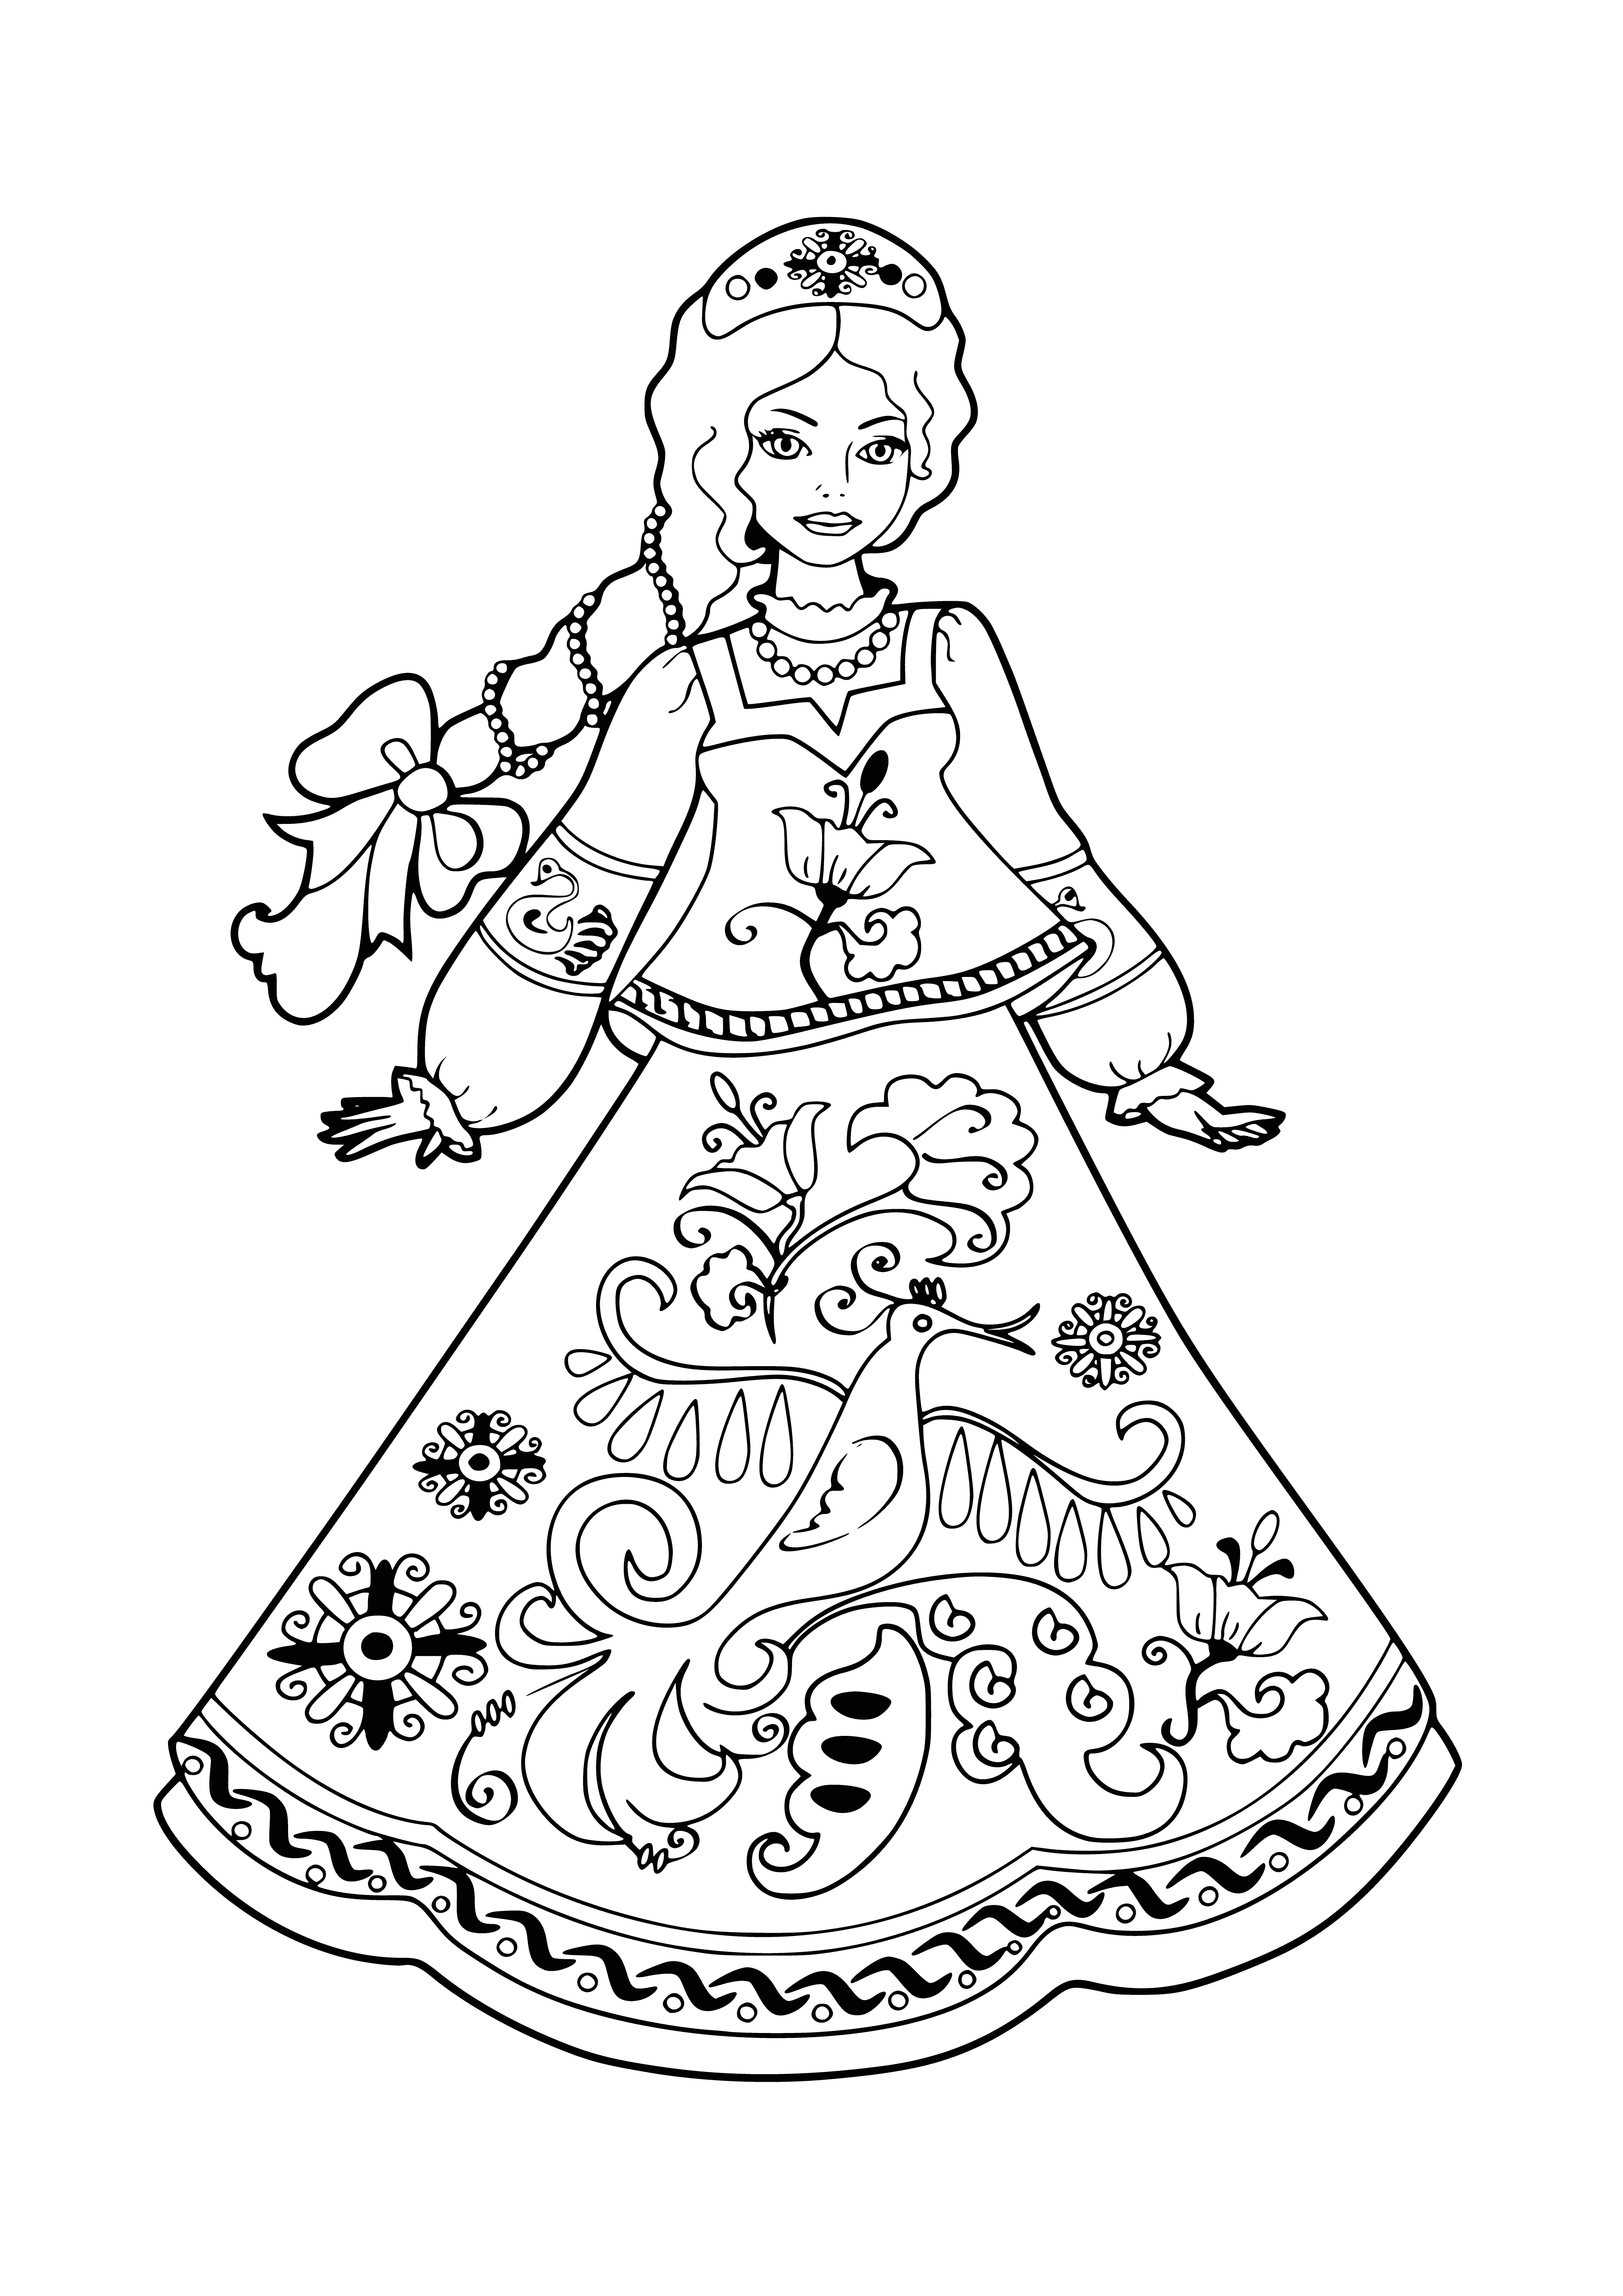 coloring page: Busy and complex pattern of various colors and shapes creates a sense of balance on light background.